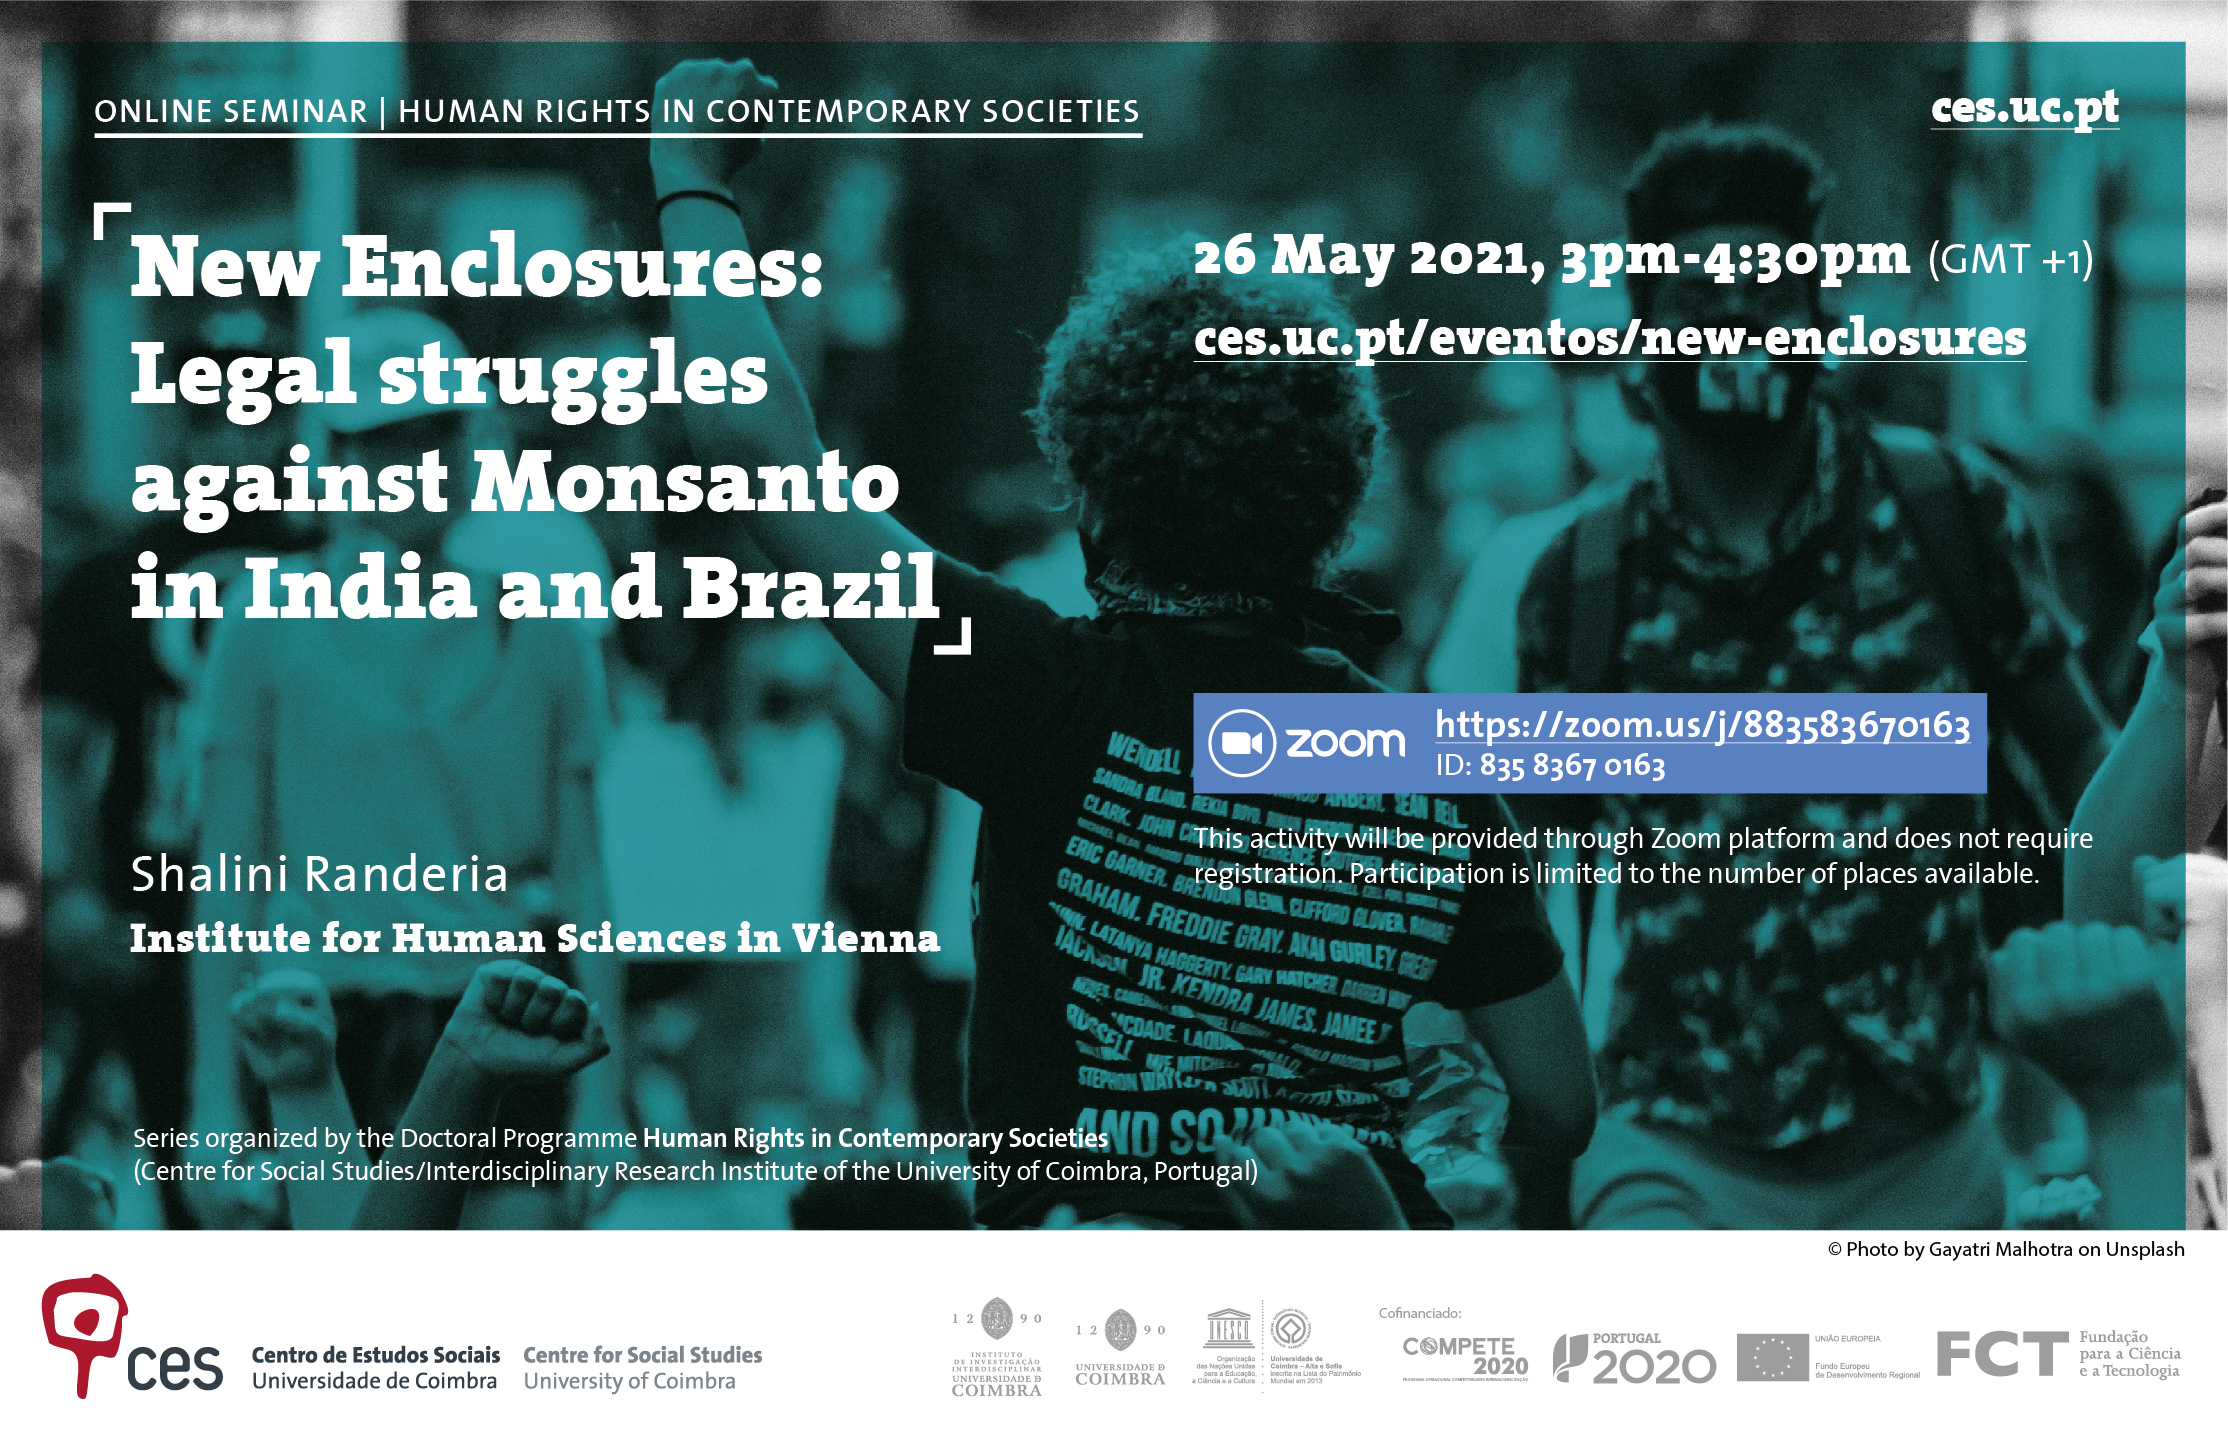 New Enclosures: Legal struggles against Monsanto in India and Brazil<span id="edit_33522"><script>$(function() { $('#edit_33522').load( "/myces/user/editobj.php?tipo=evento&id=33522" ); });</script></span>